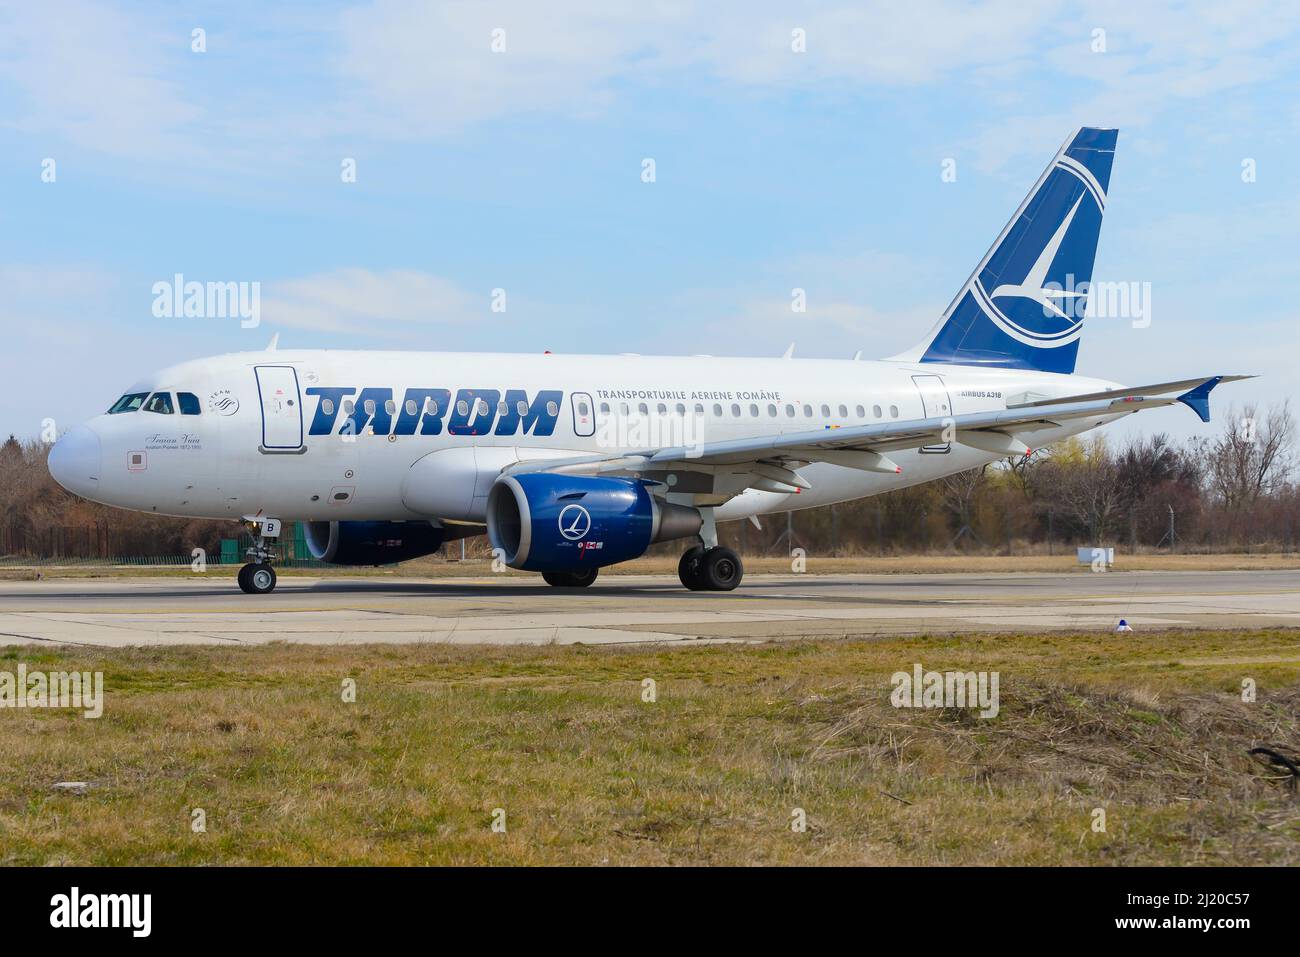 TAROM Airbus A318 airplane at Bucharest Airport. Aircraft of Romanian Air Transport. National flag carrier airline of Romania. Stock Photo